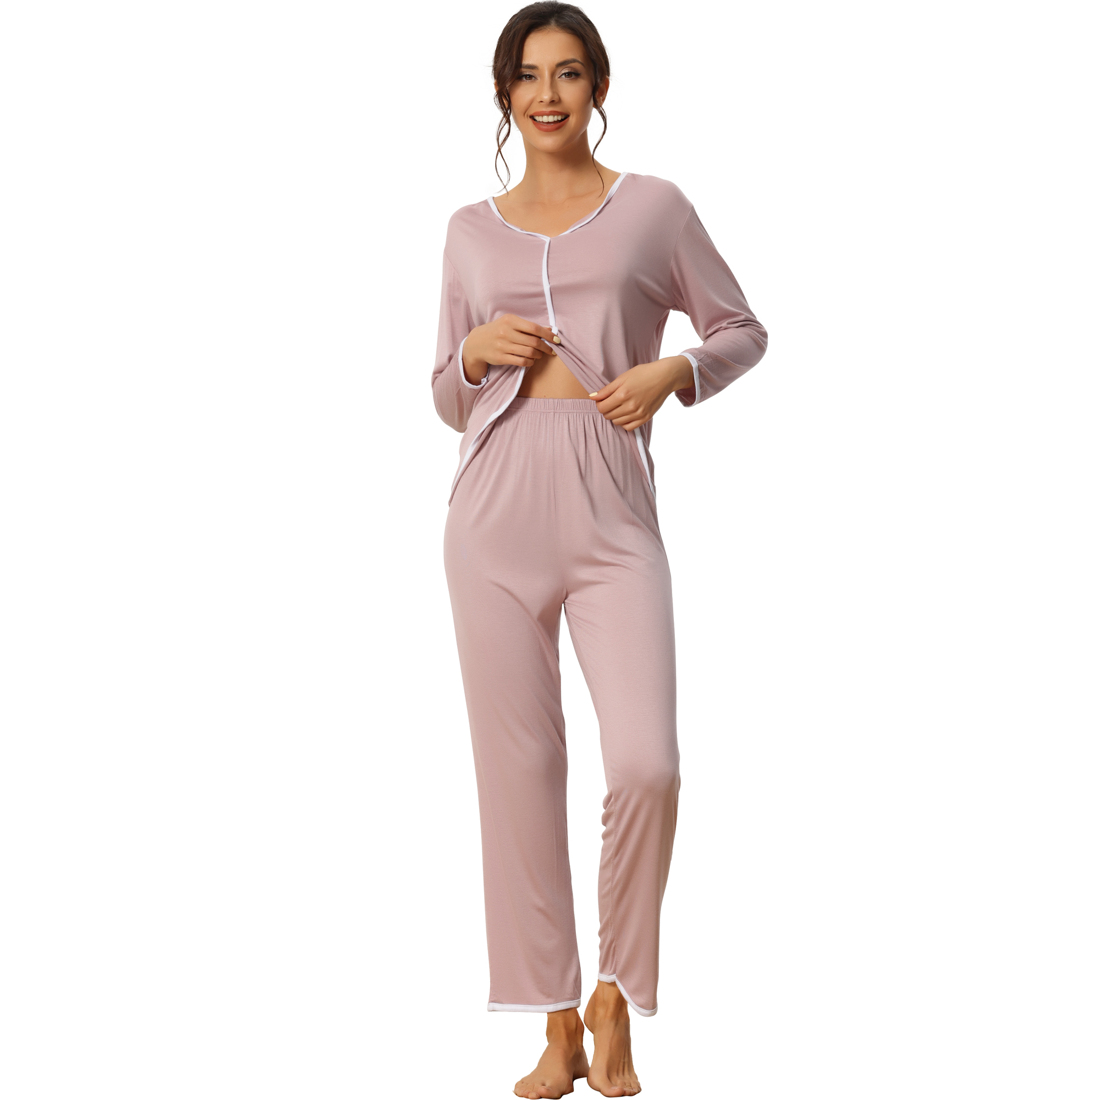 Unique Bargains Womens Sleepwear Pajamas Long Sleeve Pullover Tops with Pants Lounge Sets